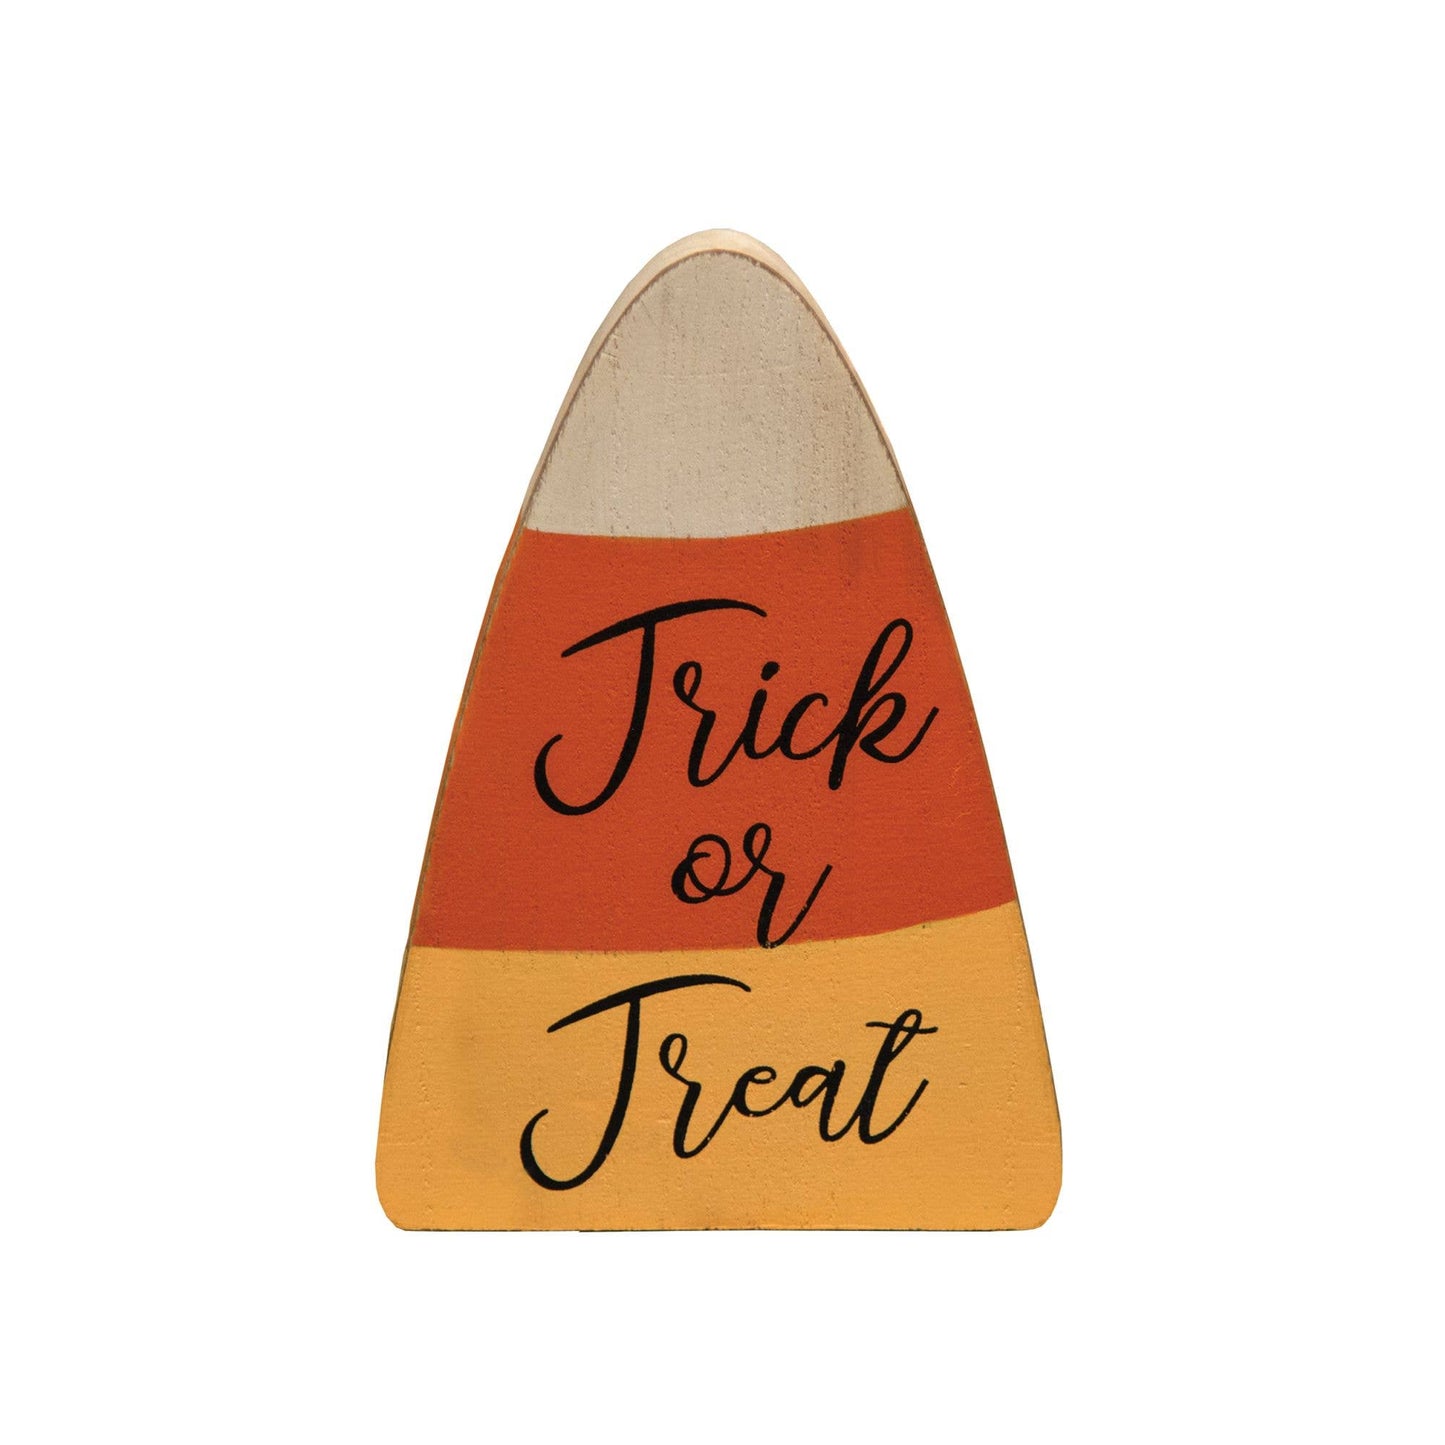 Trick or Treat Candy Corn Chunky Sitter